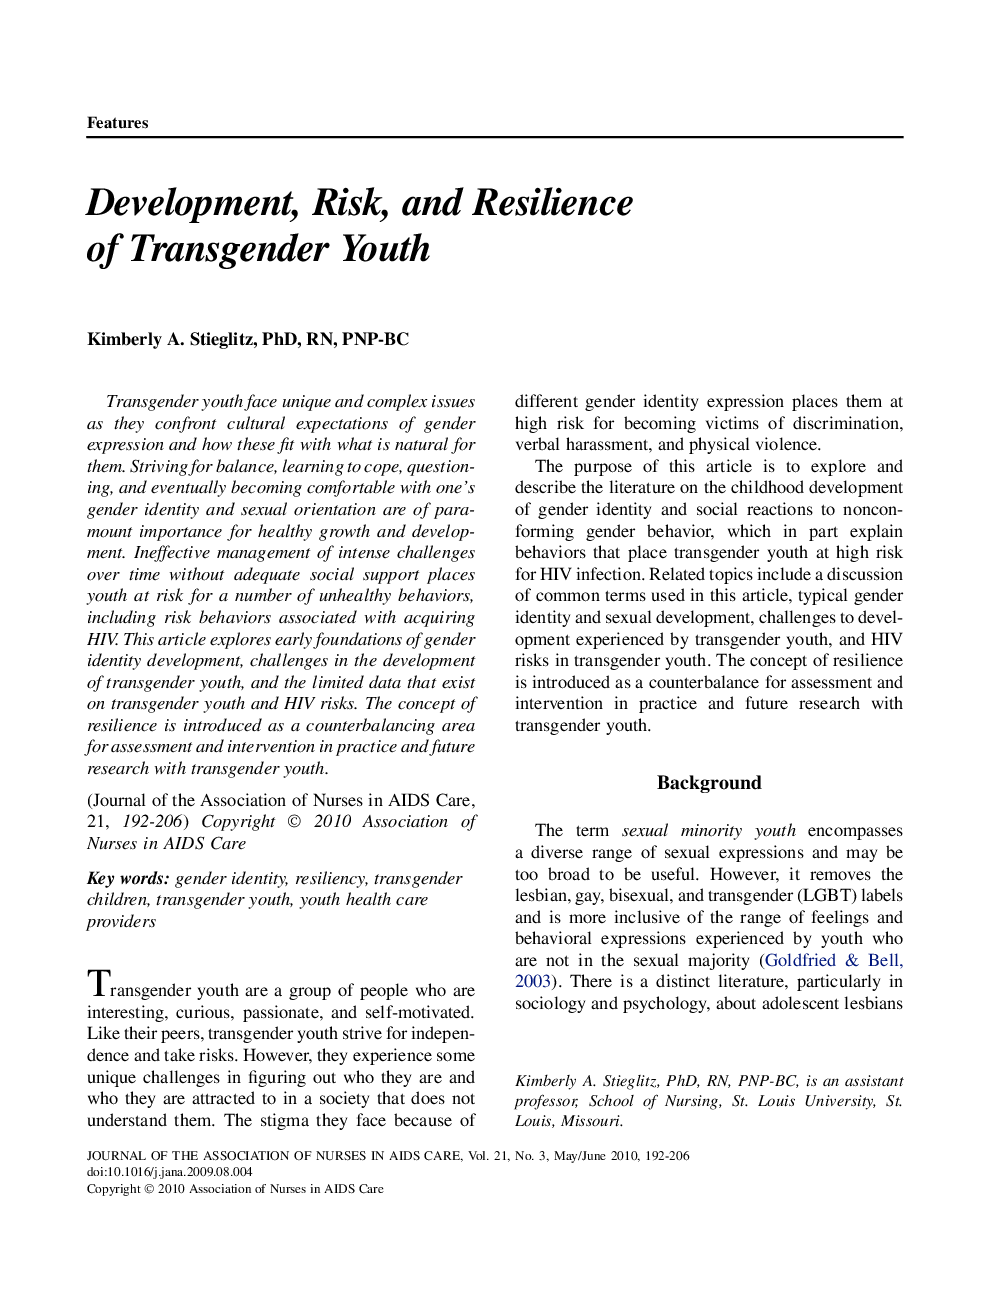 Development, Risk, and Resilience of Transgender Youth